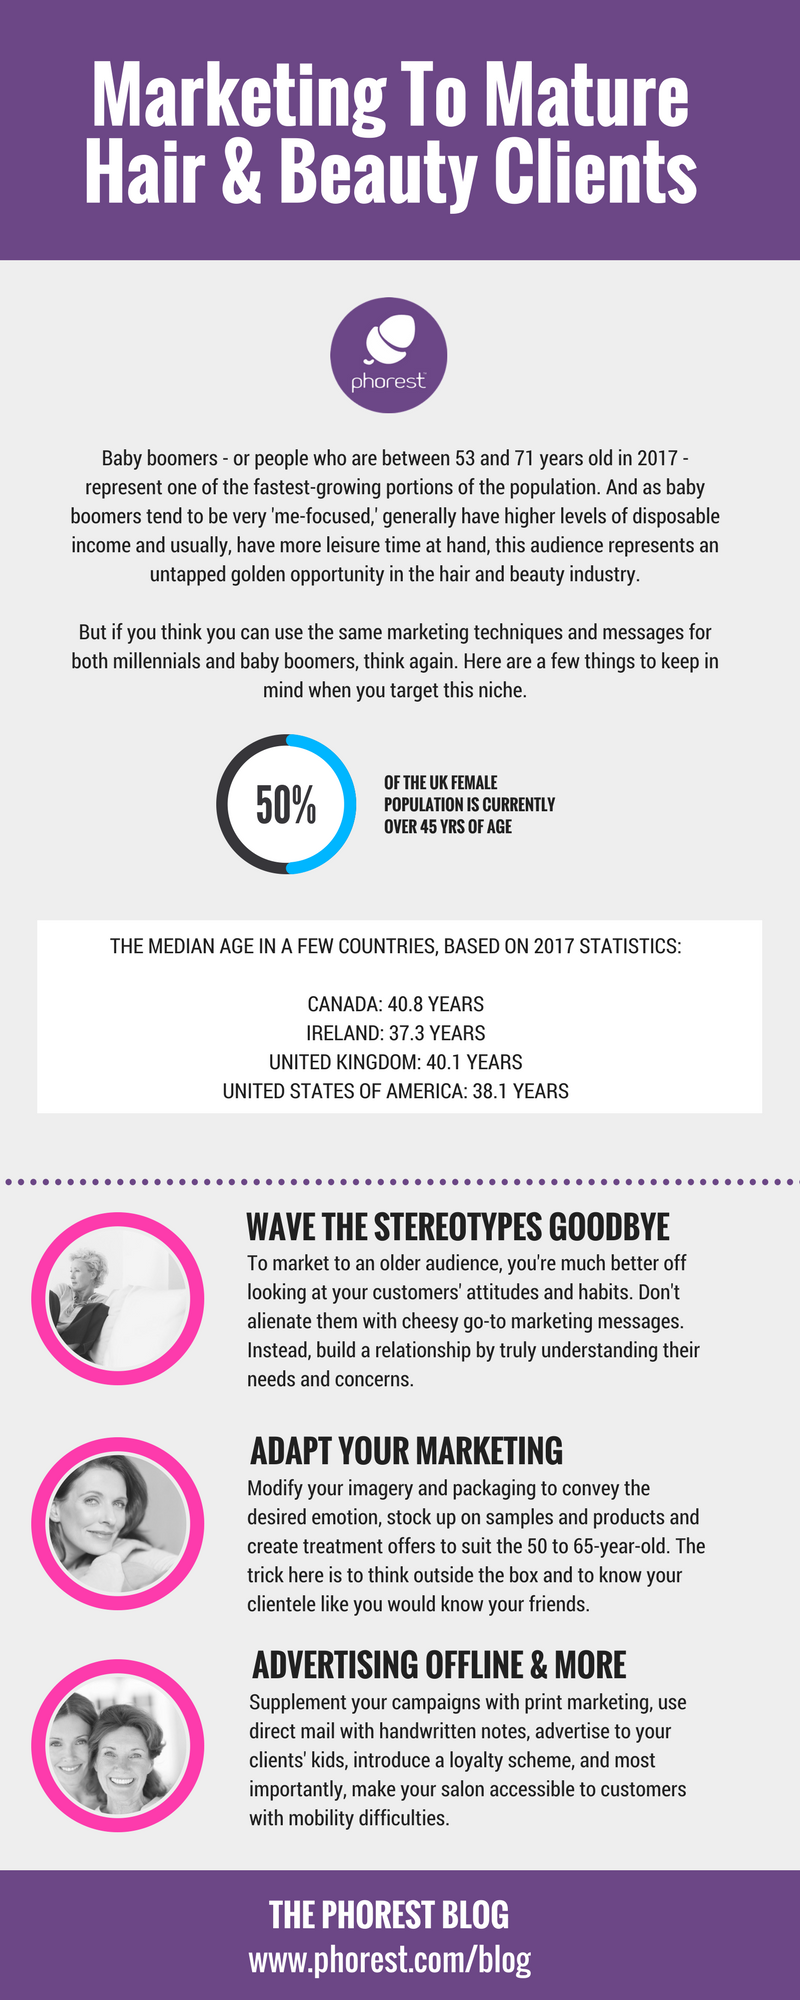 Marketing To Mature Hair And Beauty Clients In The Digital Age | Phorest